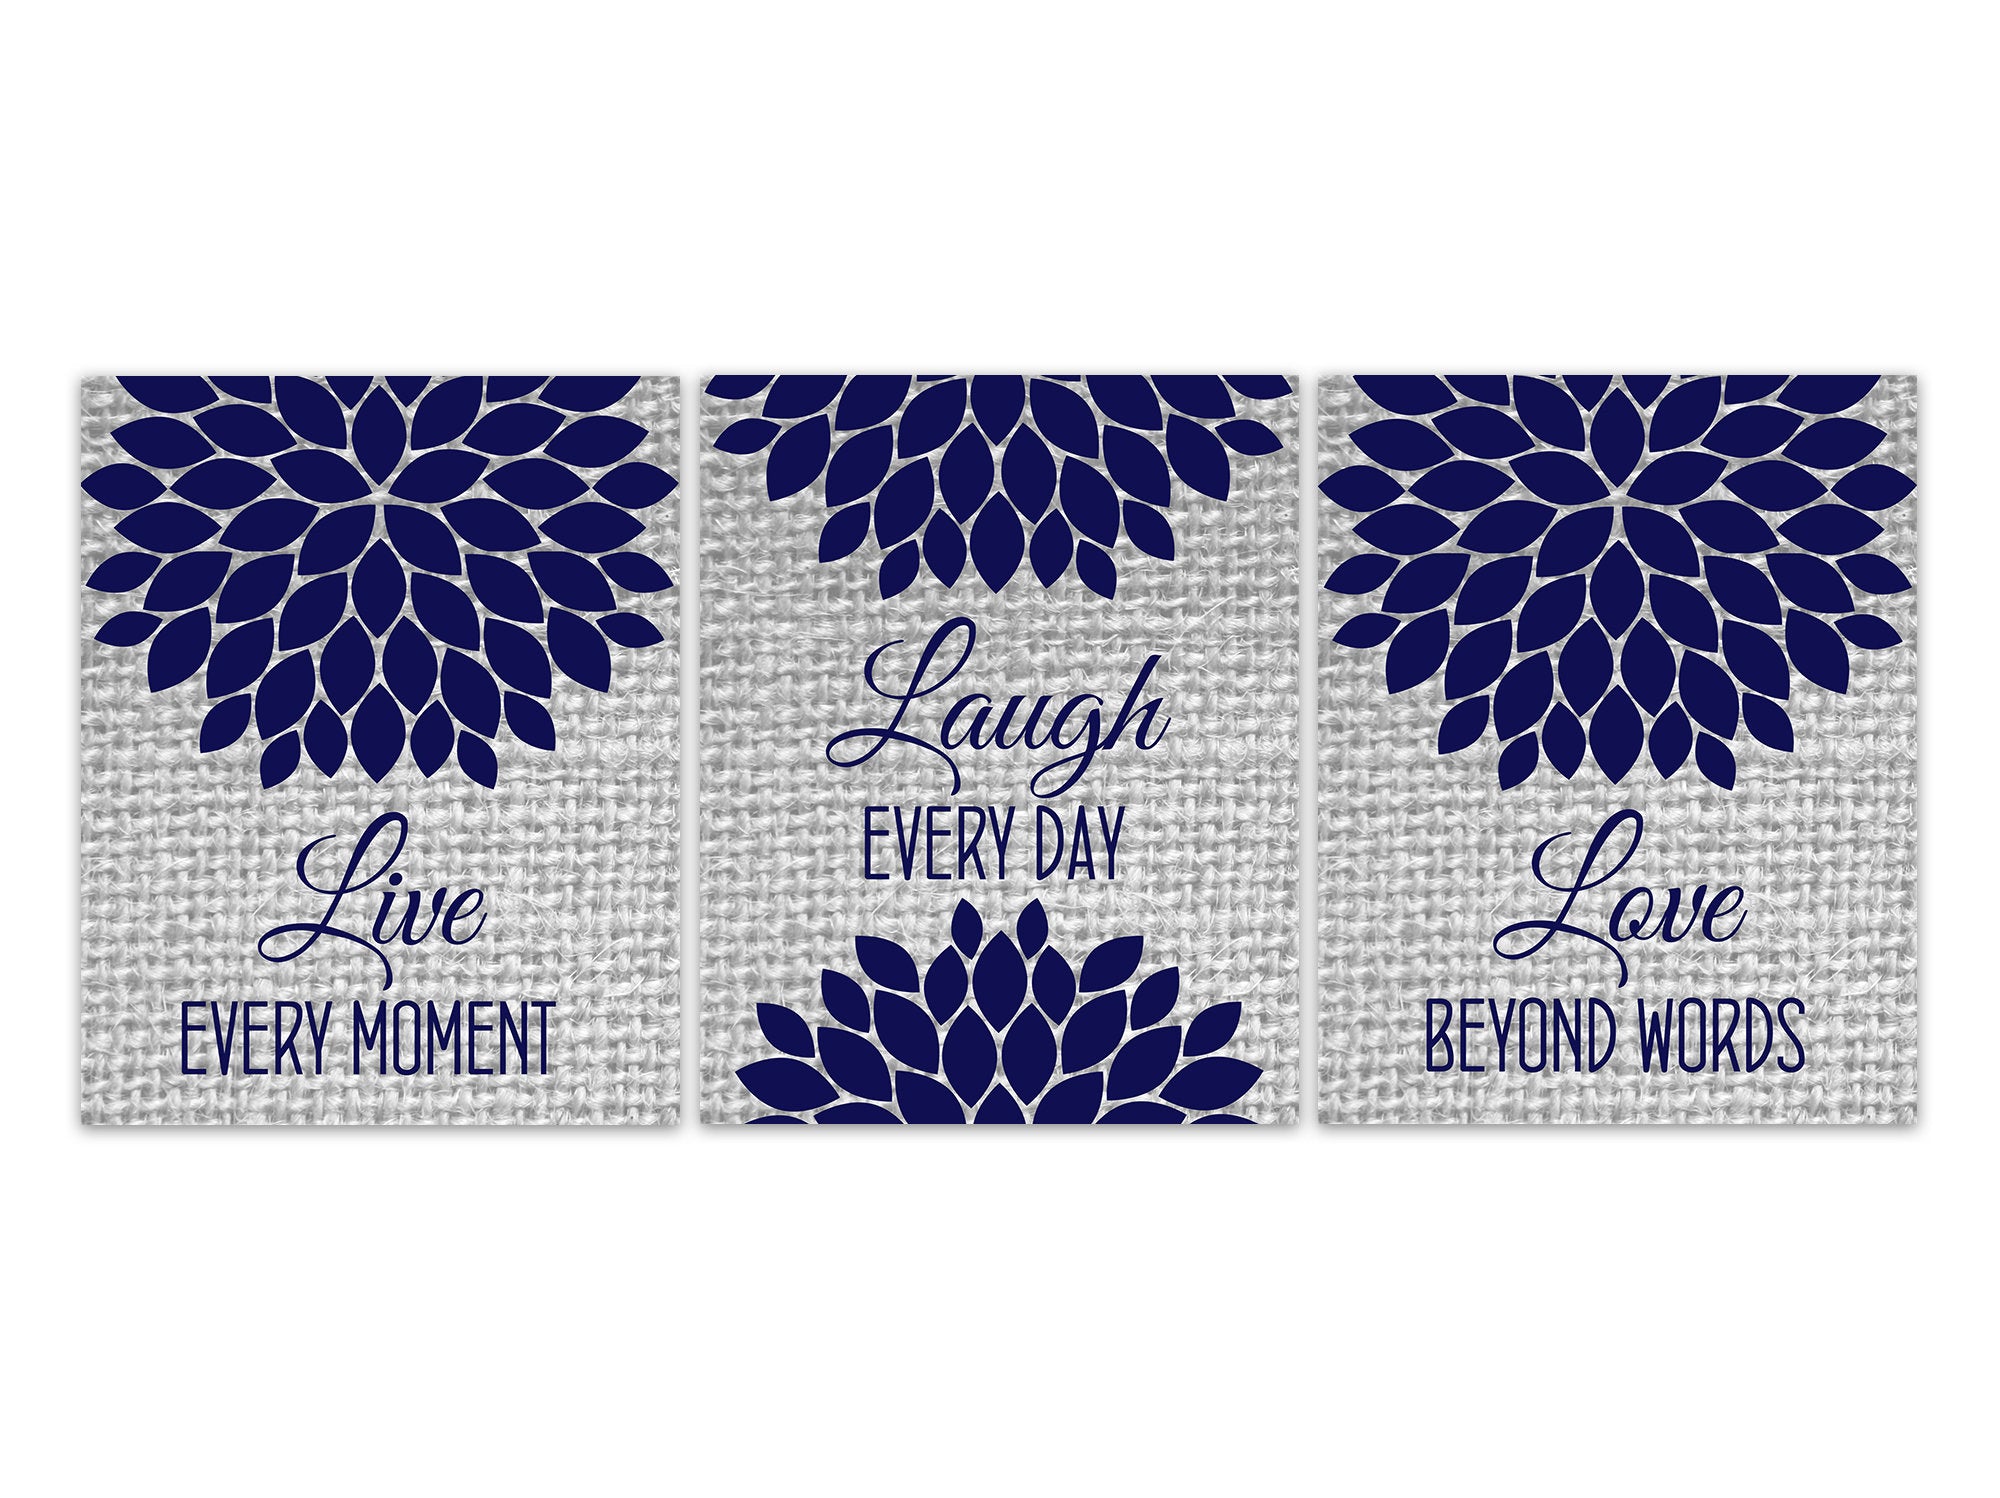 Live Every Moment, Laugh Every Day, Love Beyond Words, Vintage Decor Wall Art, Blue Burlap Effect Family Quote Canvas or Prints - HOME610